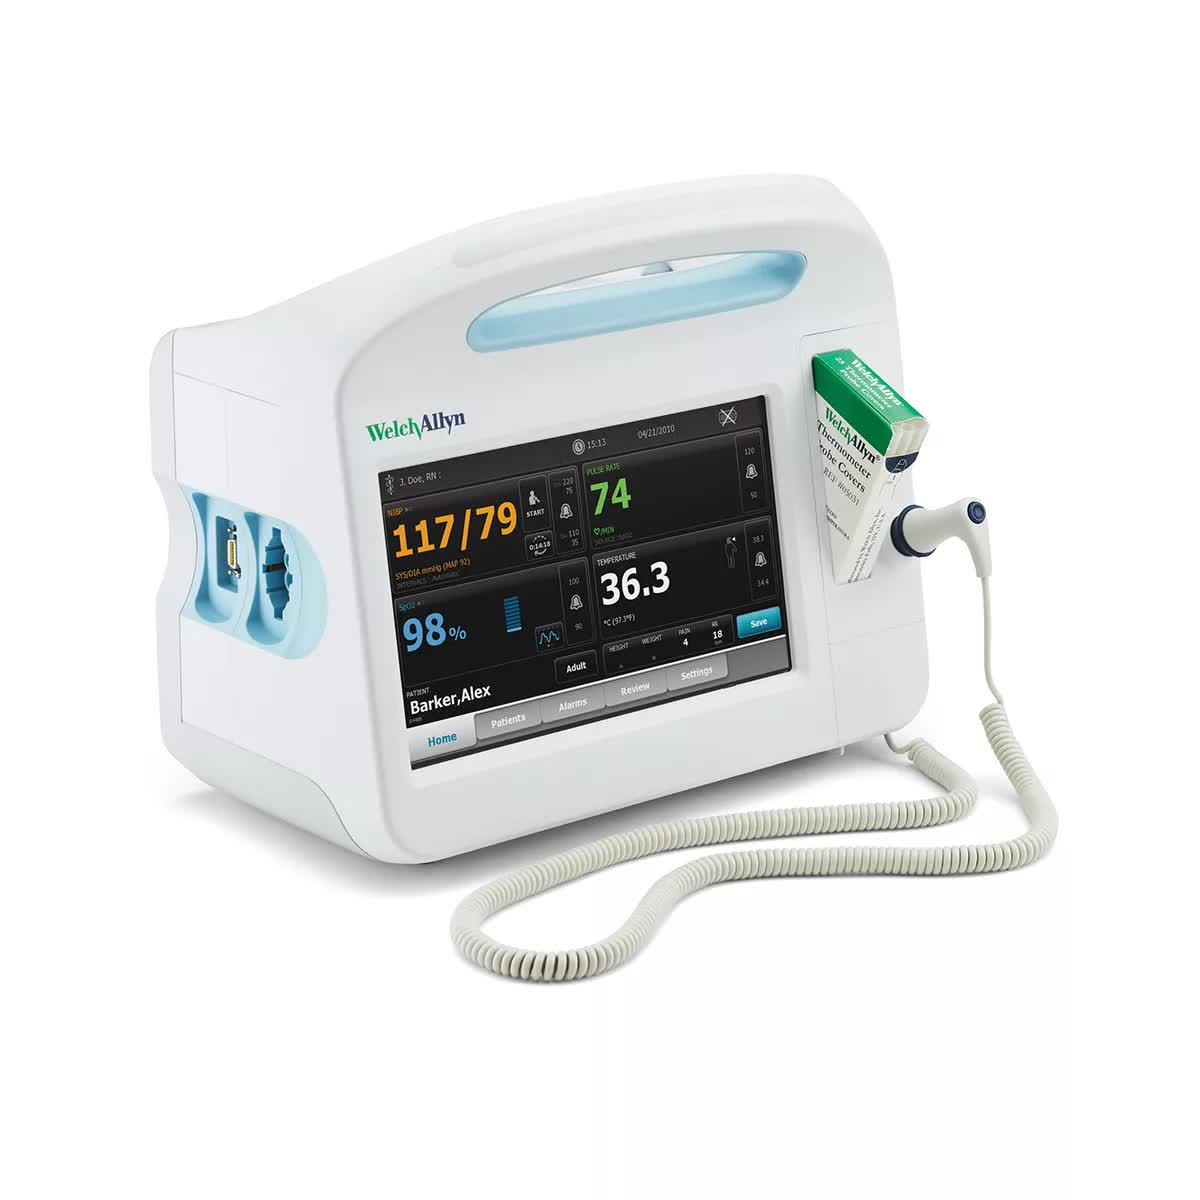 Welch Allyn Connex 6700 Series Vital Signs Monitor with Nellcor SpO2 and SureTemp Plus